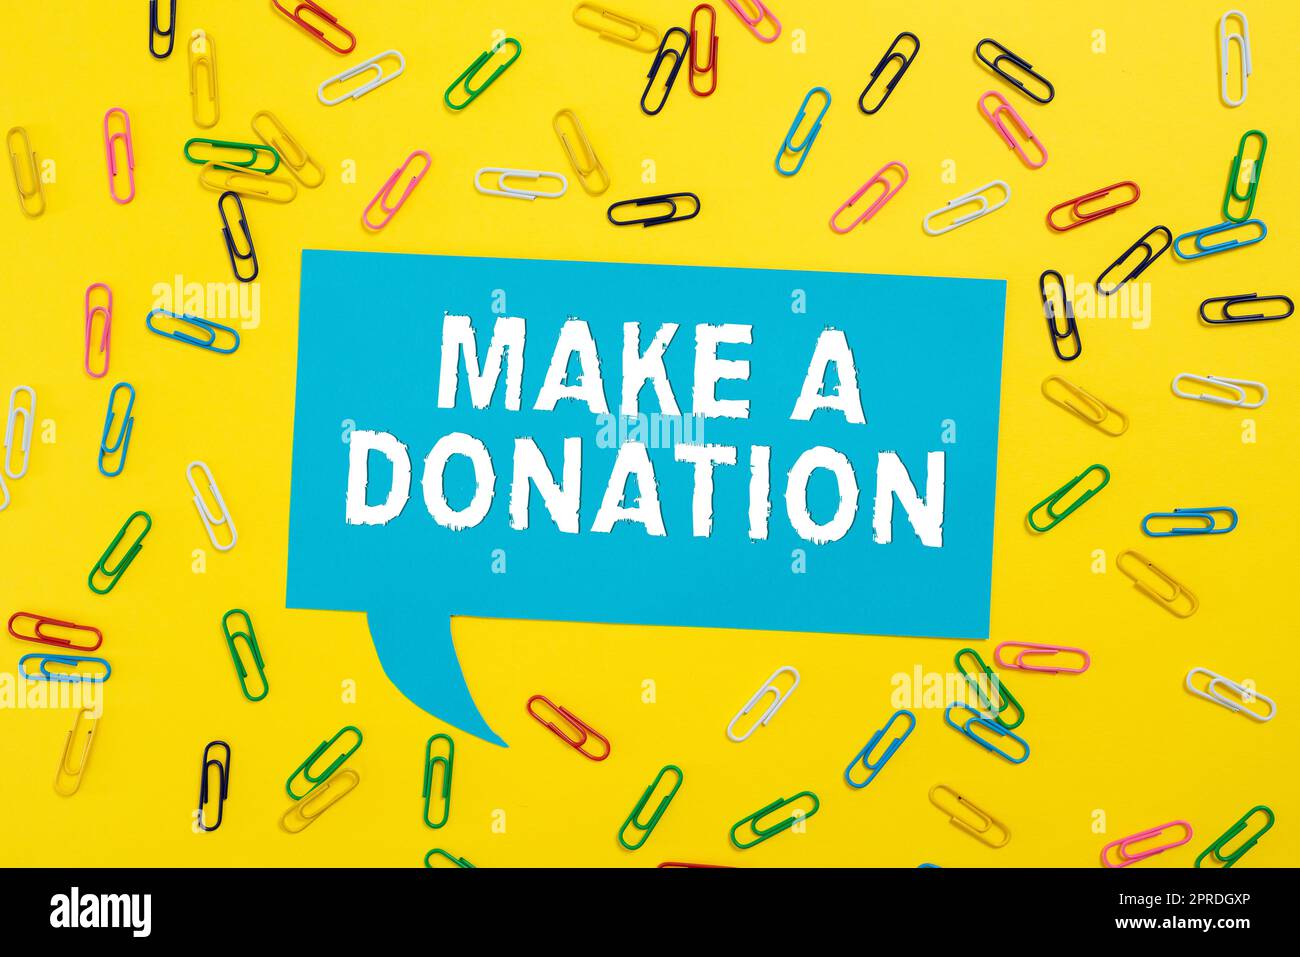 Writing displaying text Make A Donation. Business approach Donate giving things not used any more to needed showing Colorful Paperclips Placed Around Speech Bubble With Important Information. Stock Photo